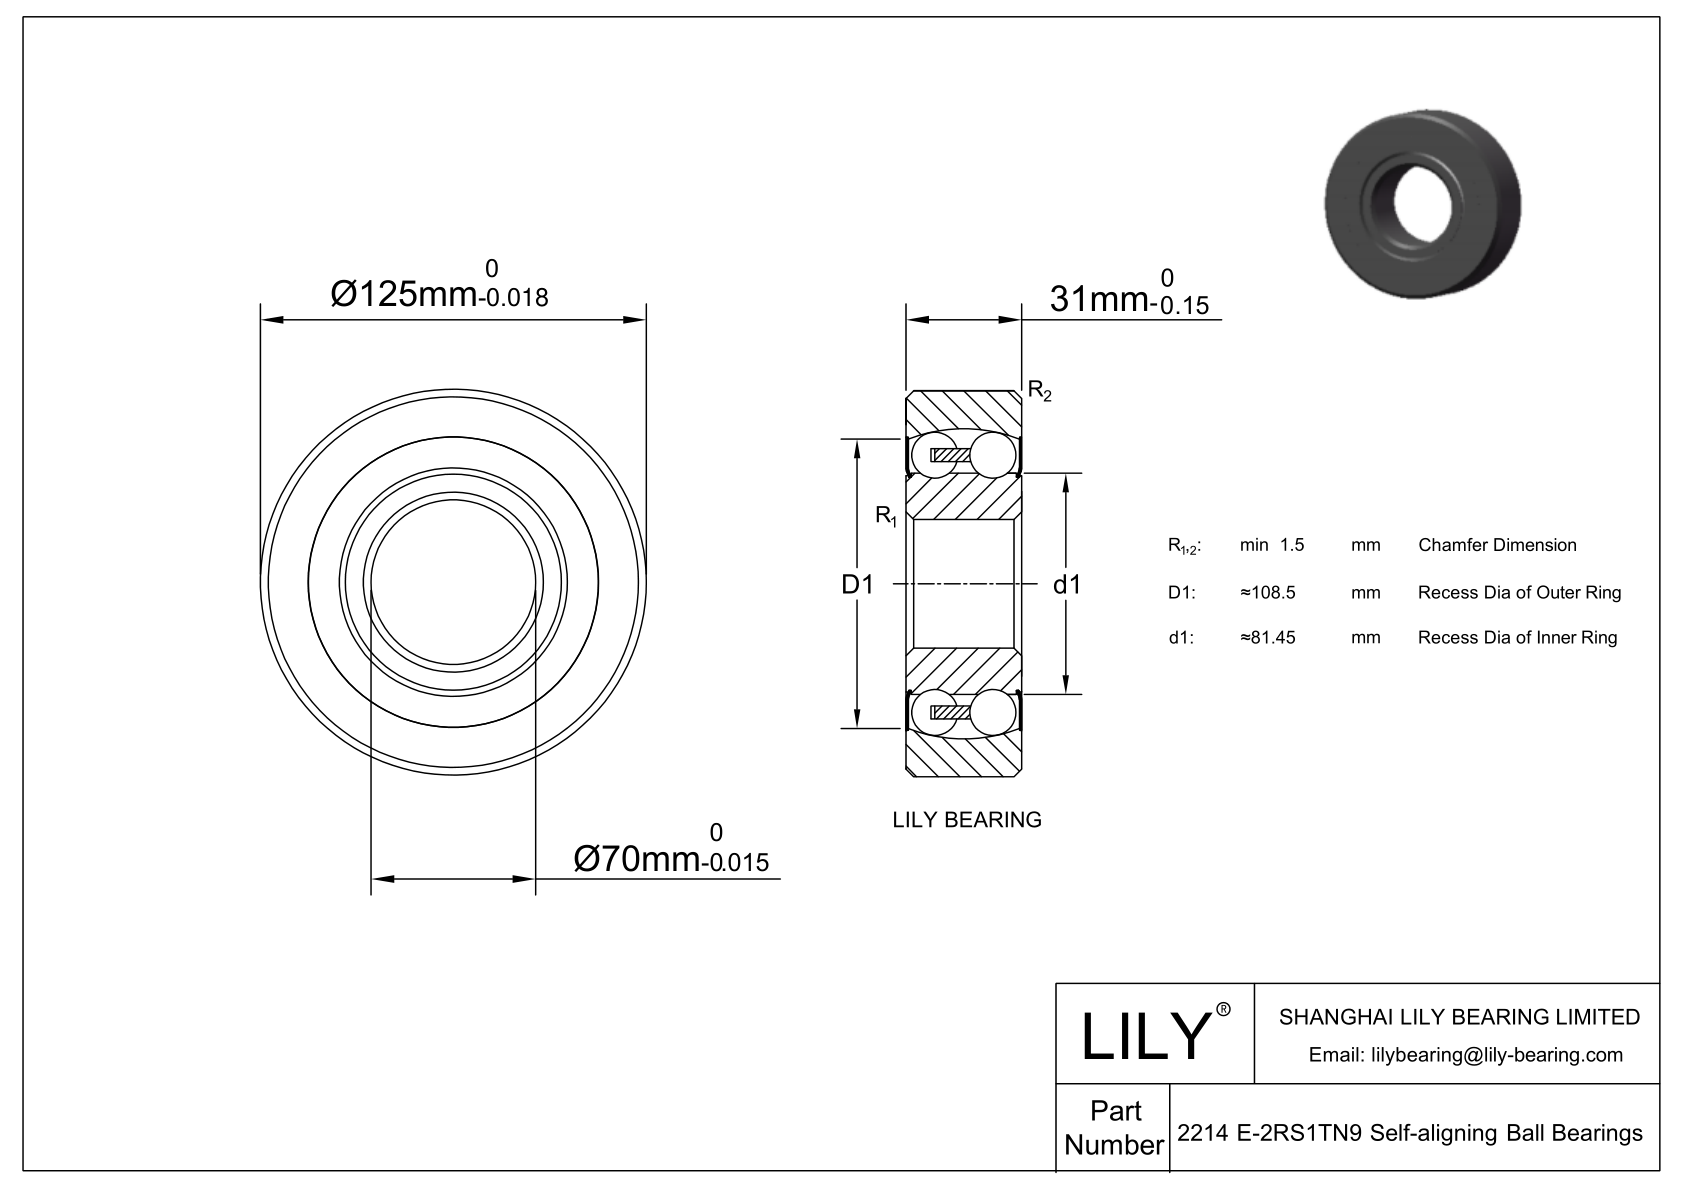 CE2214 E-SIPP Silicon Nitride Self Aligning Ball Bearings cad drawing